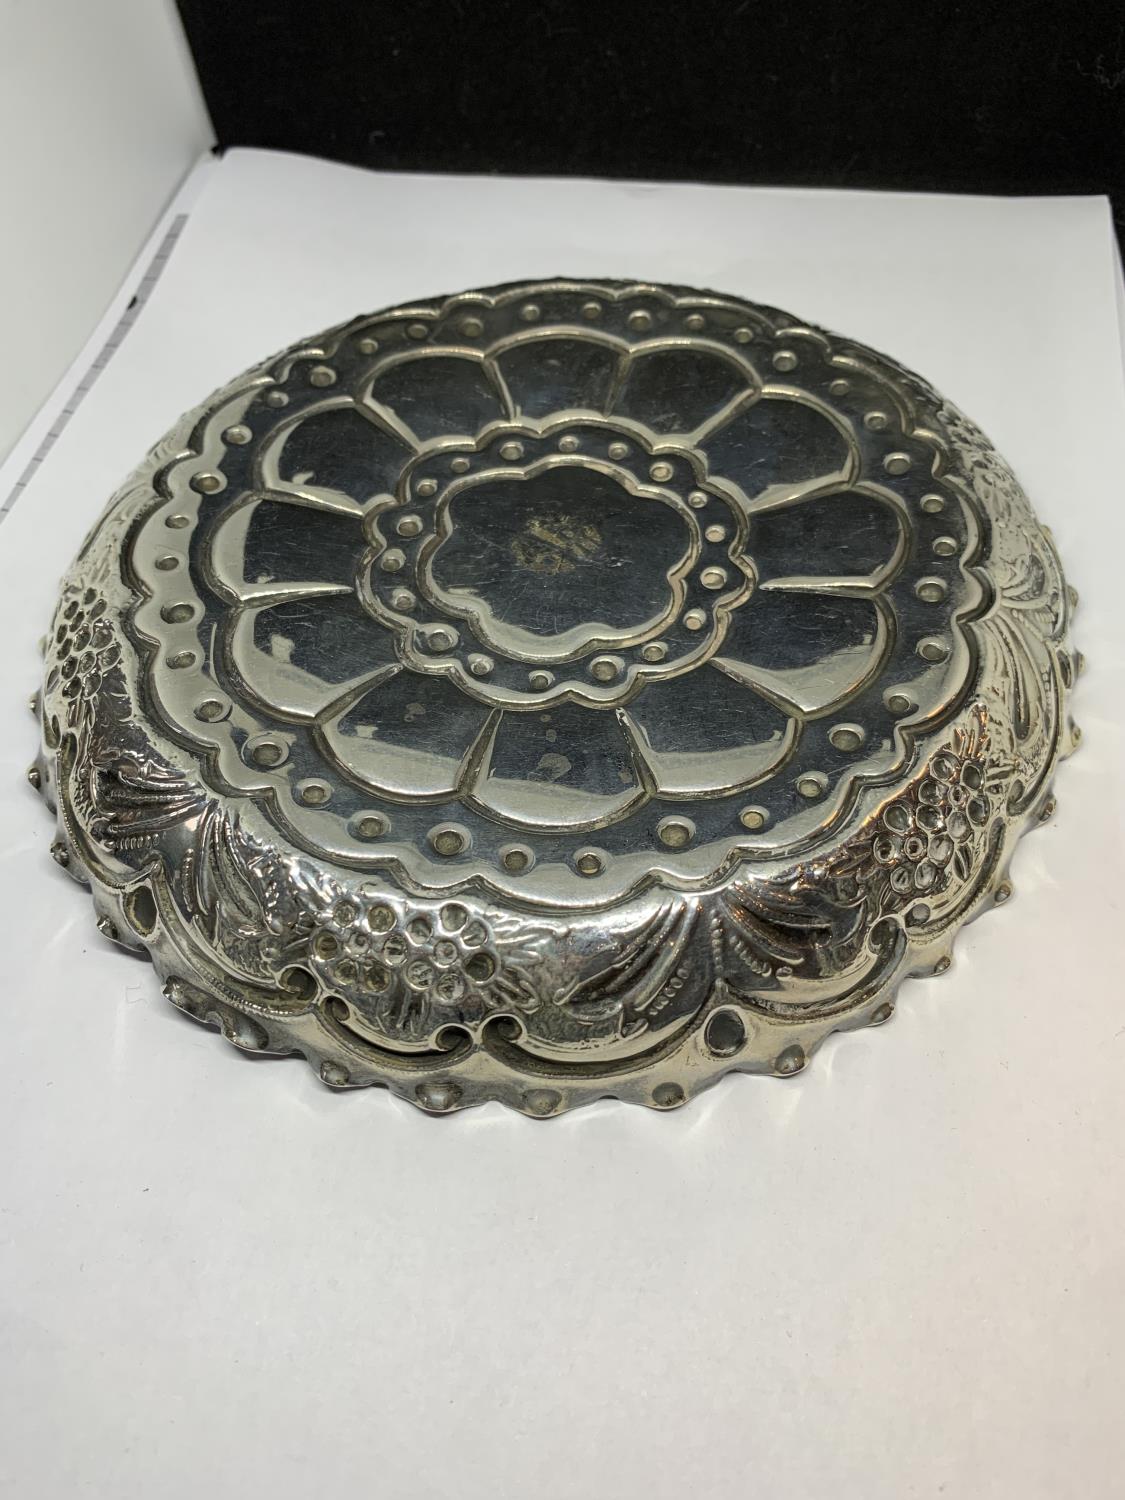 A DECORATIVE HALLMARKED LONDON SILVER FLUTED TRAY GROSS WEIGHT 147 GRAMS - Image 4 of 5